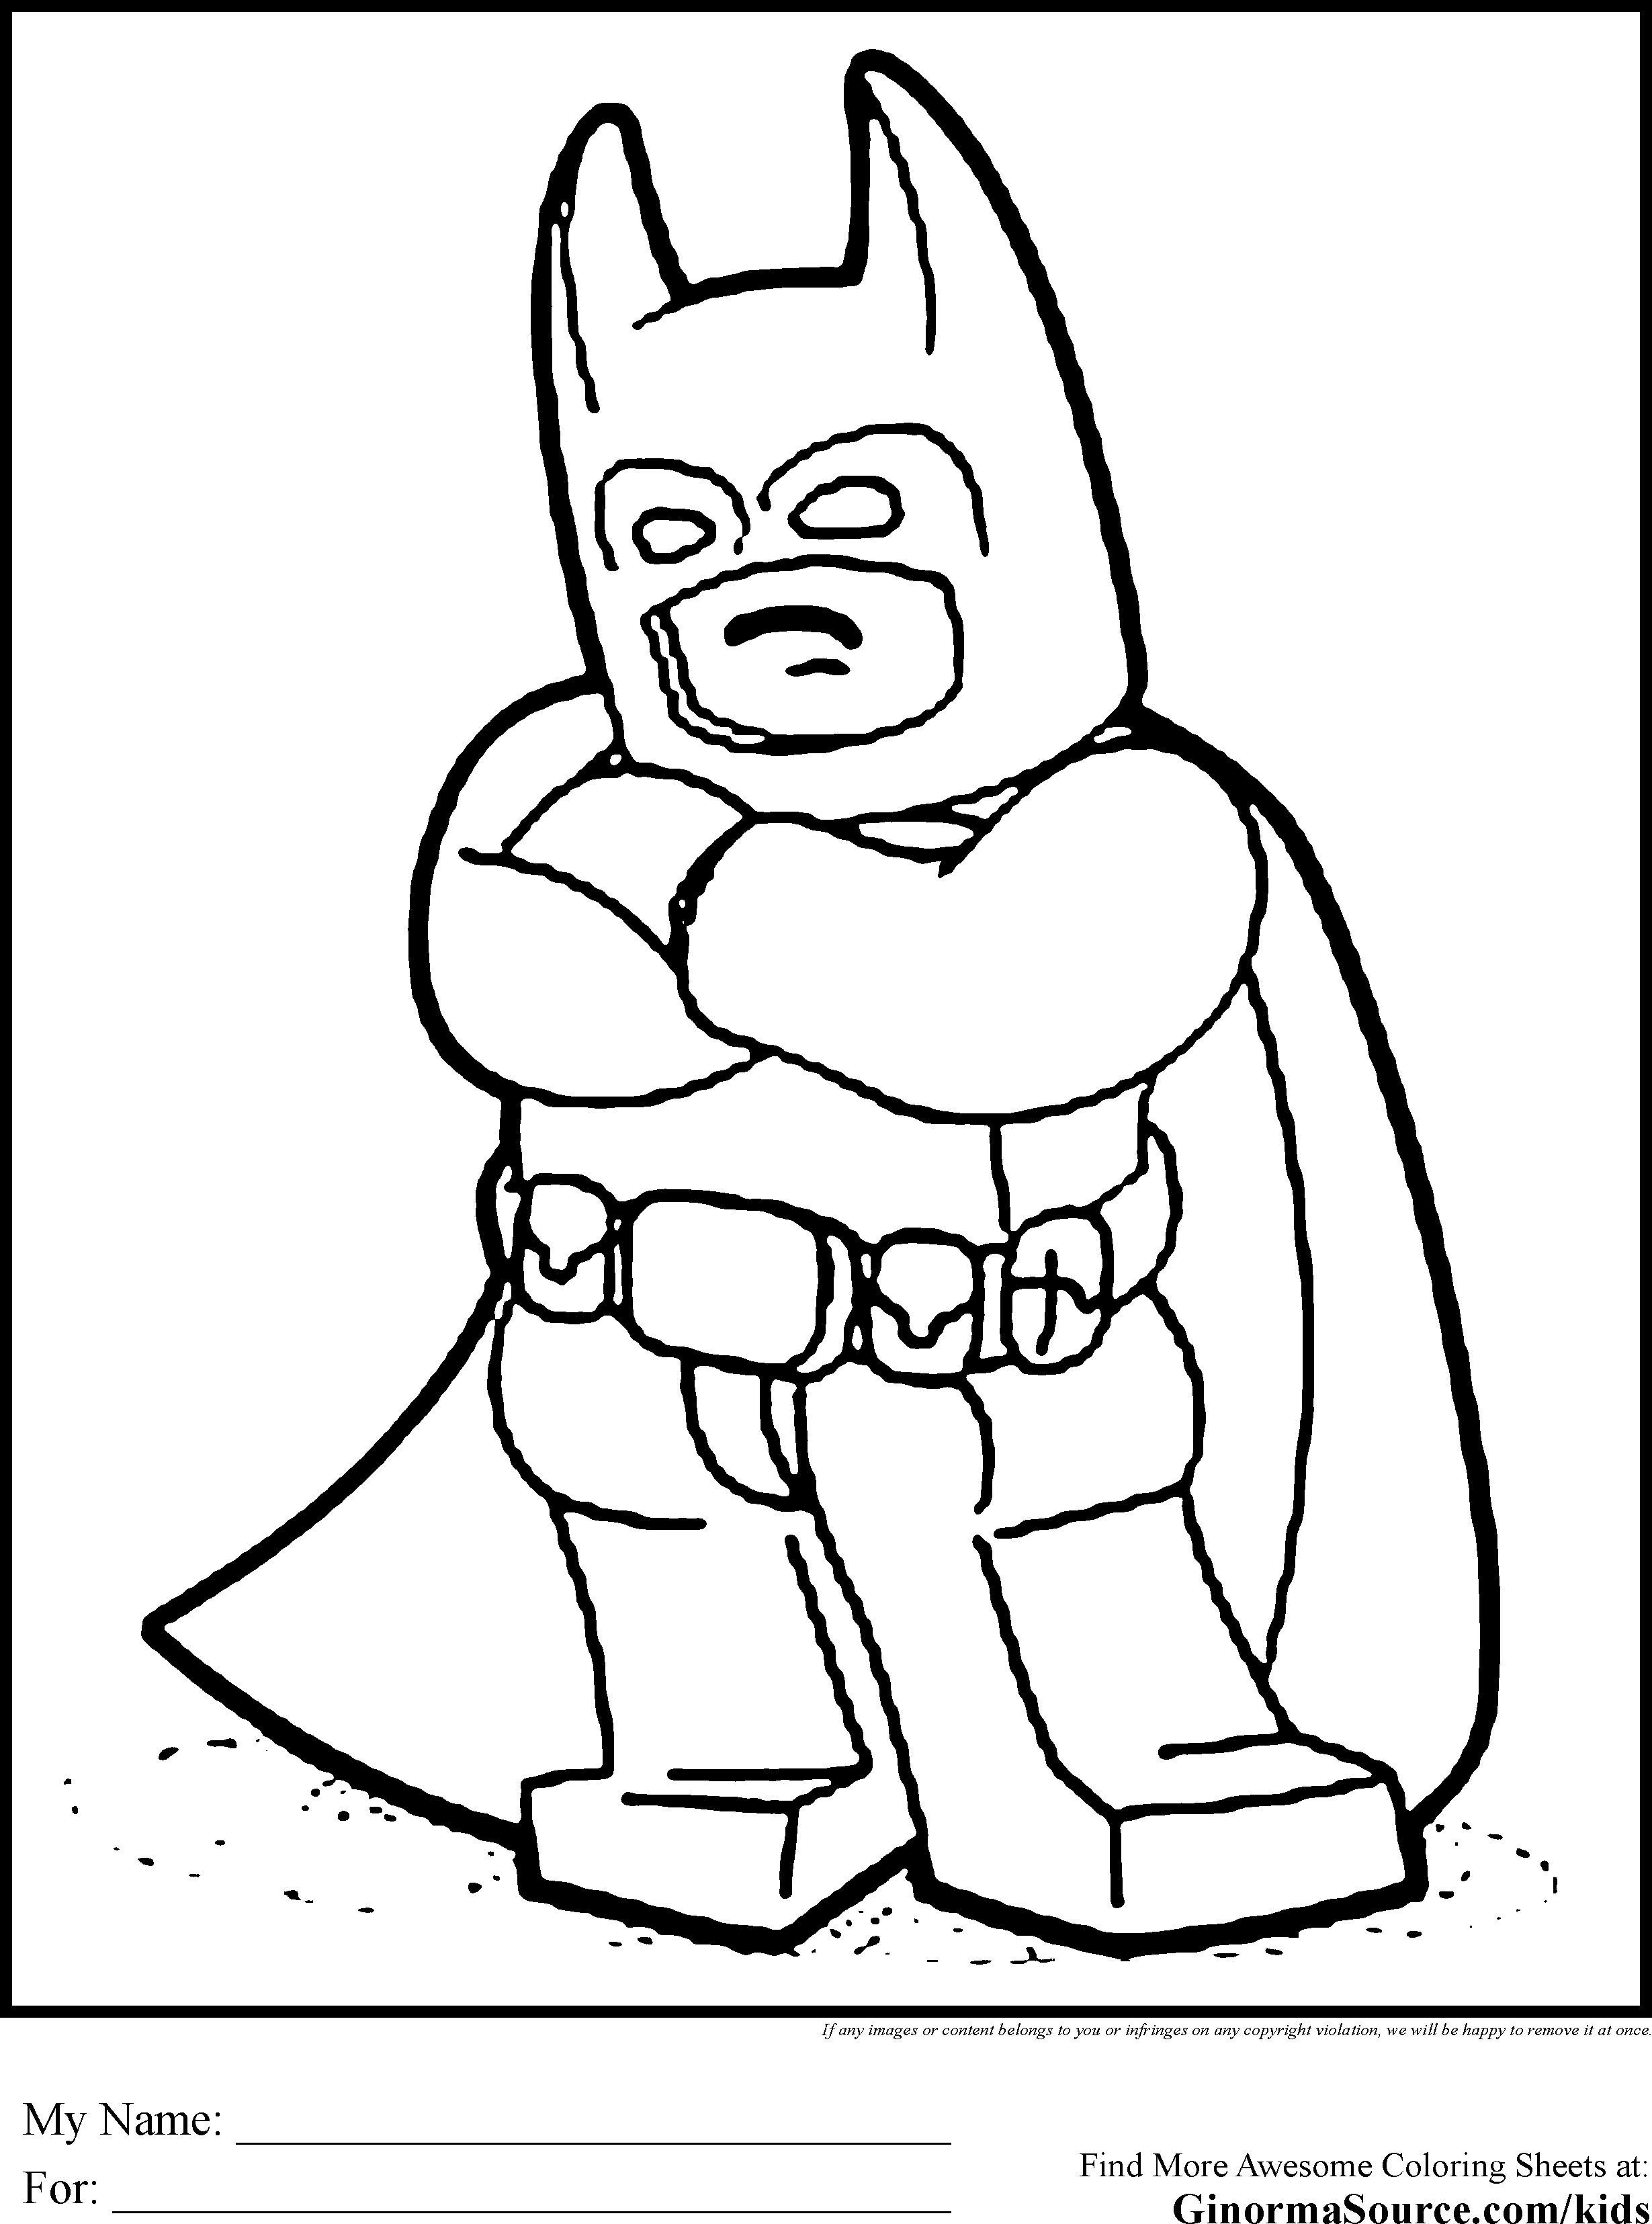 Lego Block Coloring Pages - Coloring Home